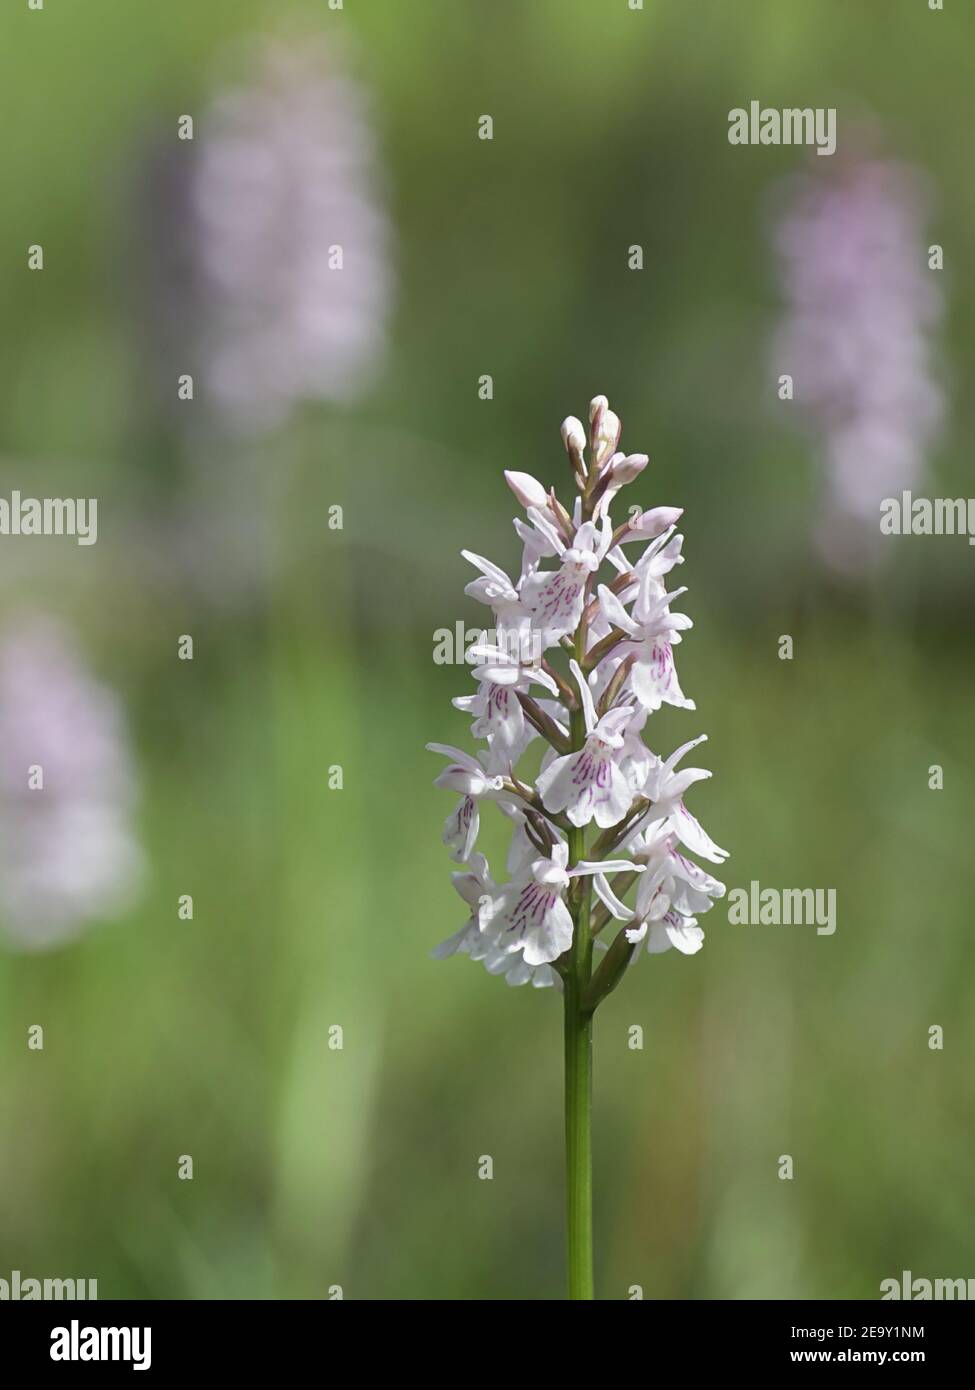 Dactylorhiza maculata, known as the heath spotted-orchid or moorland spotted orchid, growing wild in Finland Stock Photo